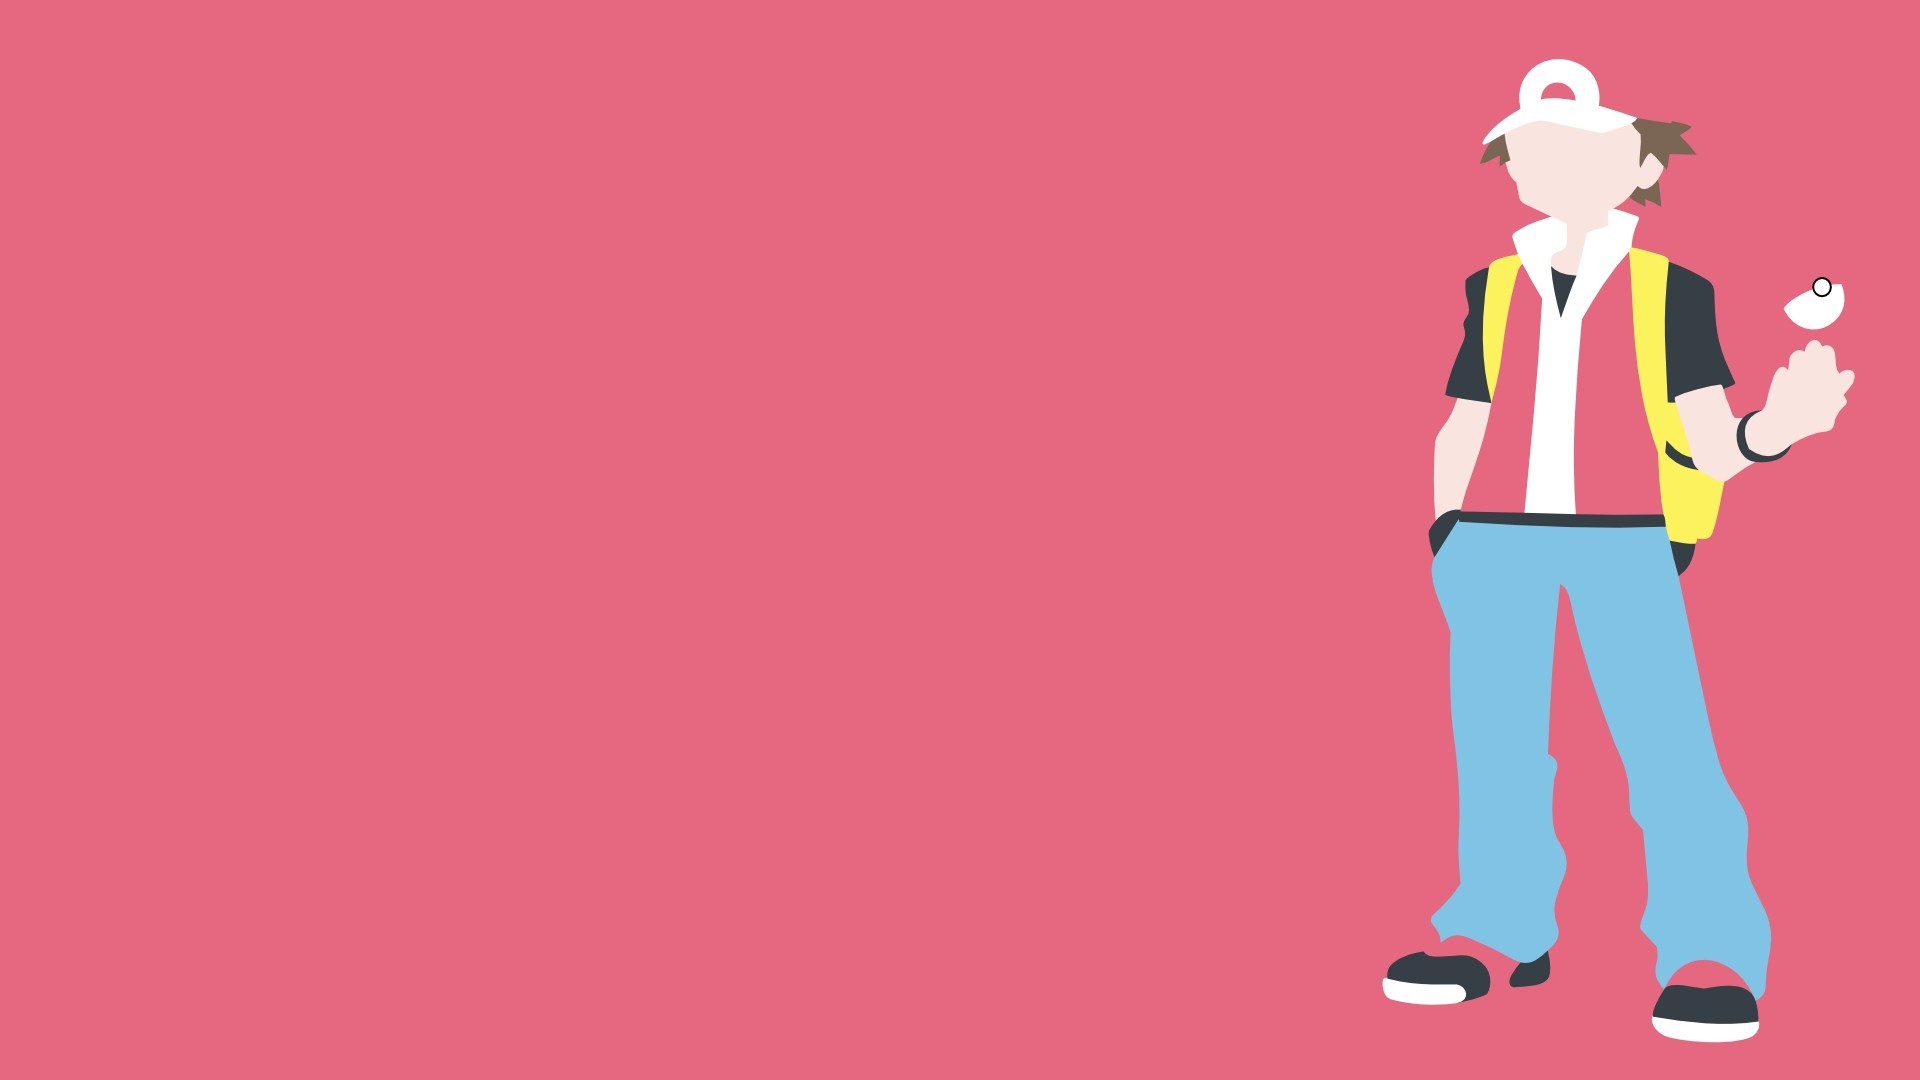 Anime 1920x1080 simple background pink background Pokémon trainers